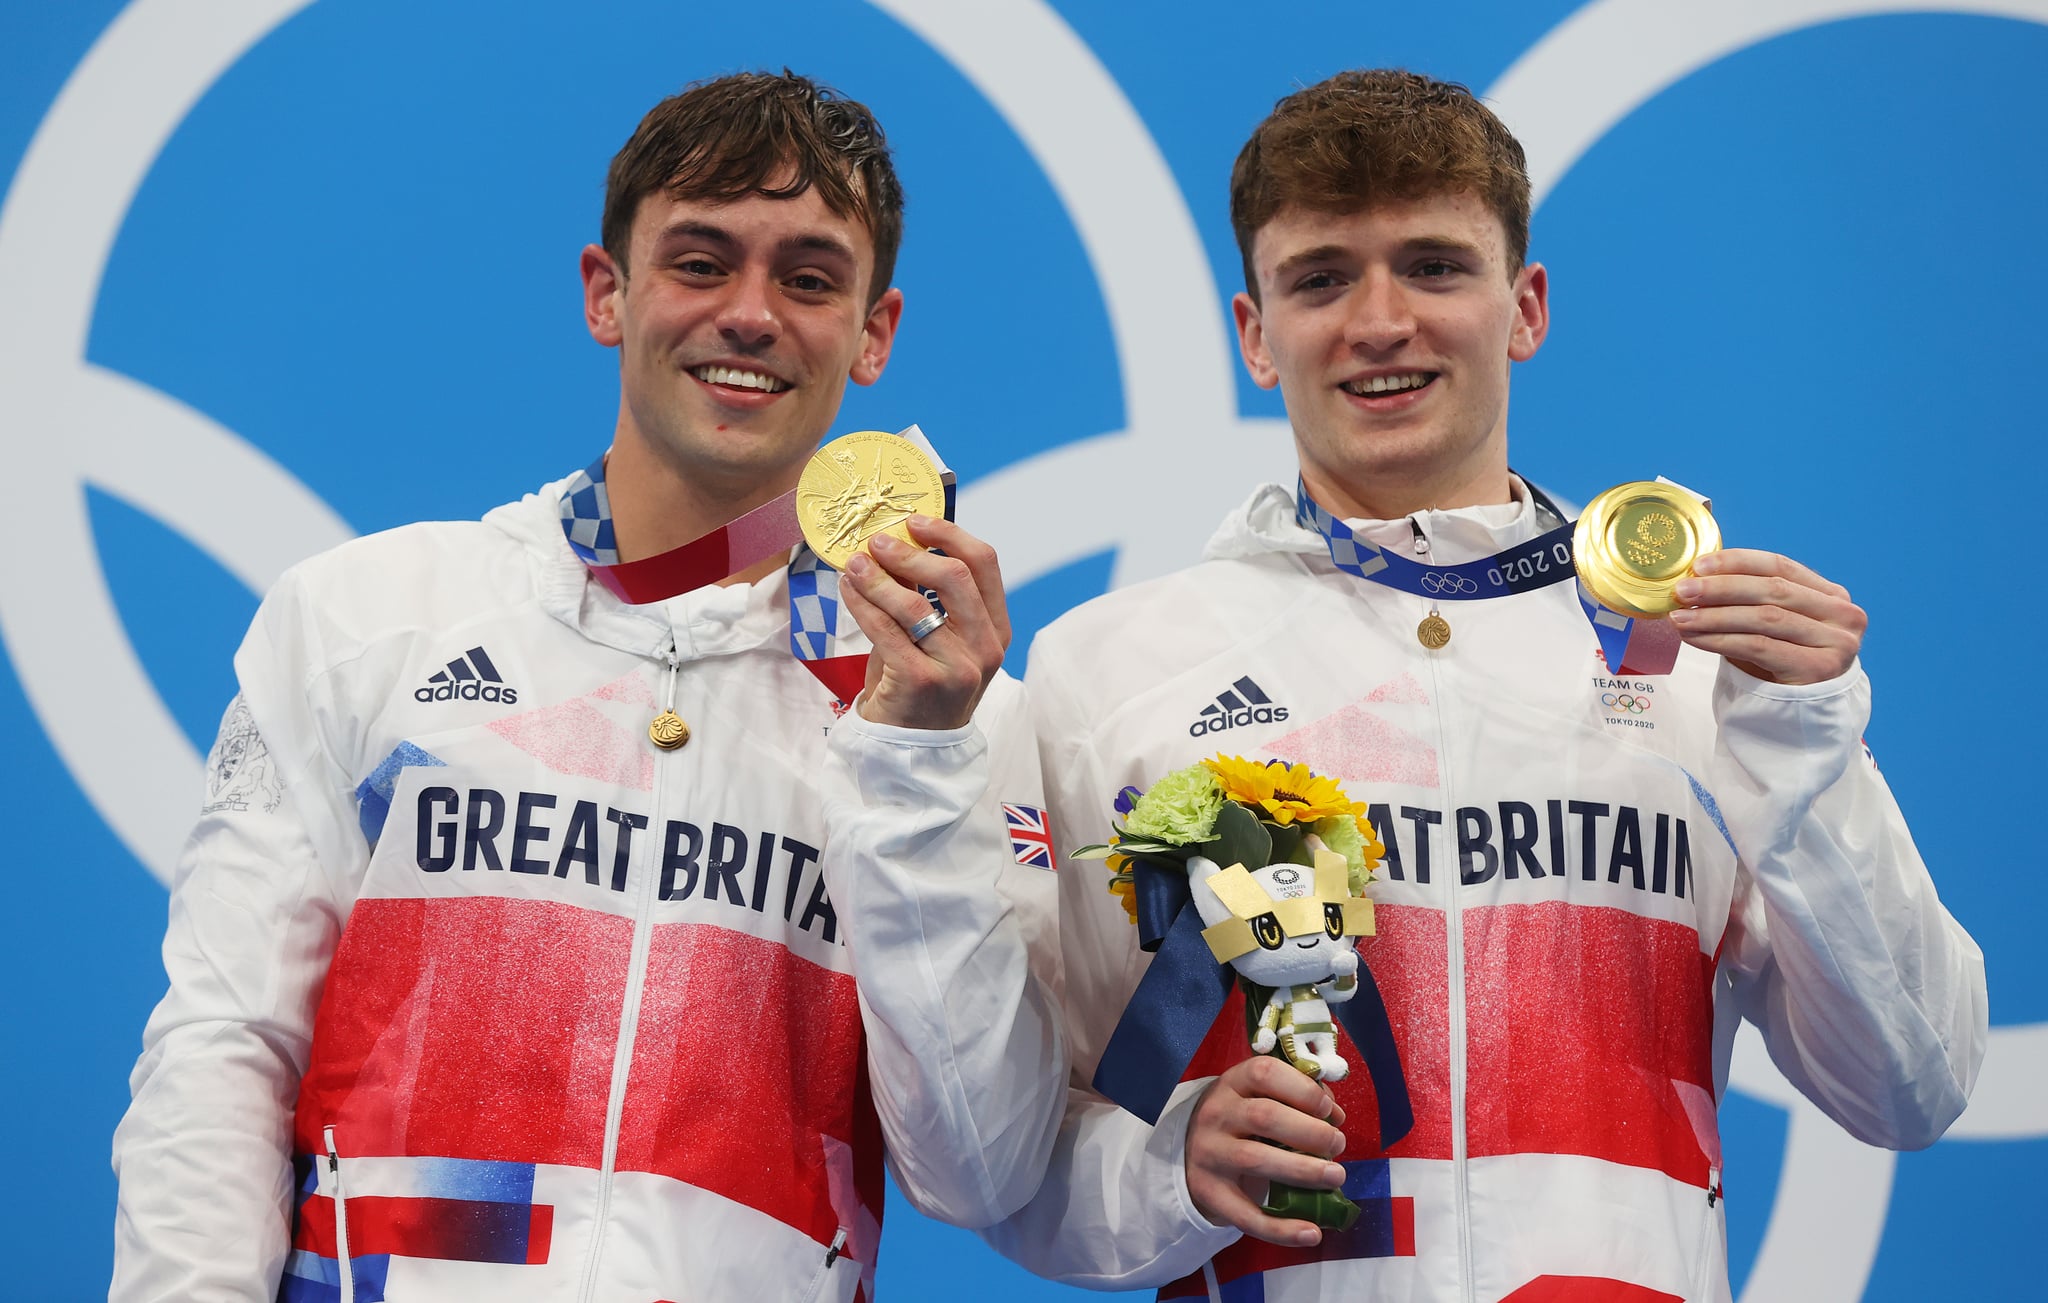 TOKYO, JAPAN - JULY 26: Matty Lee and Thomas Daley of Team Great Britain pose with their gold medals during the medal presentation for the Men's Synchronised 10m Platform Final on day three of the Tokyo 2020 Olympic Games at Tokyo Aquatics Centre on July 26, 2021 in Tokyo, Japan. (Photo by Clive Rose/Getty Images)